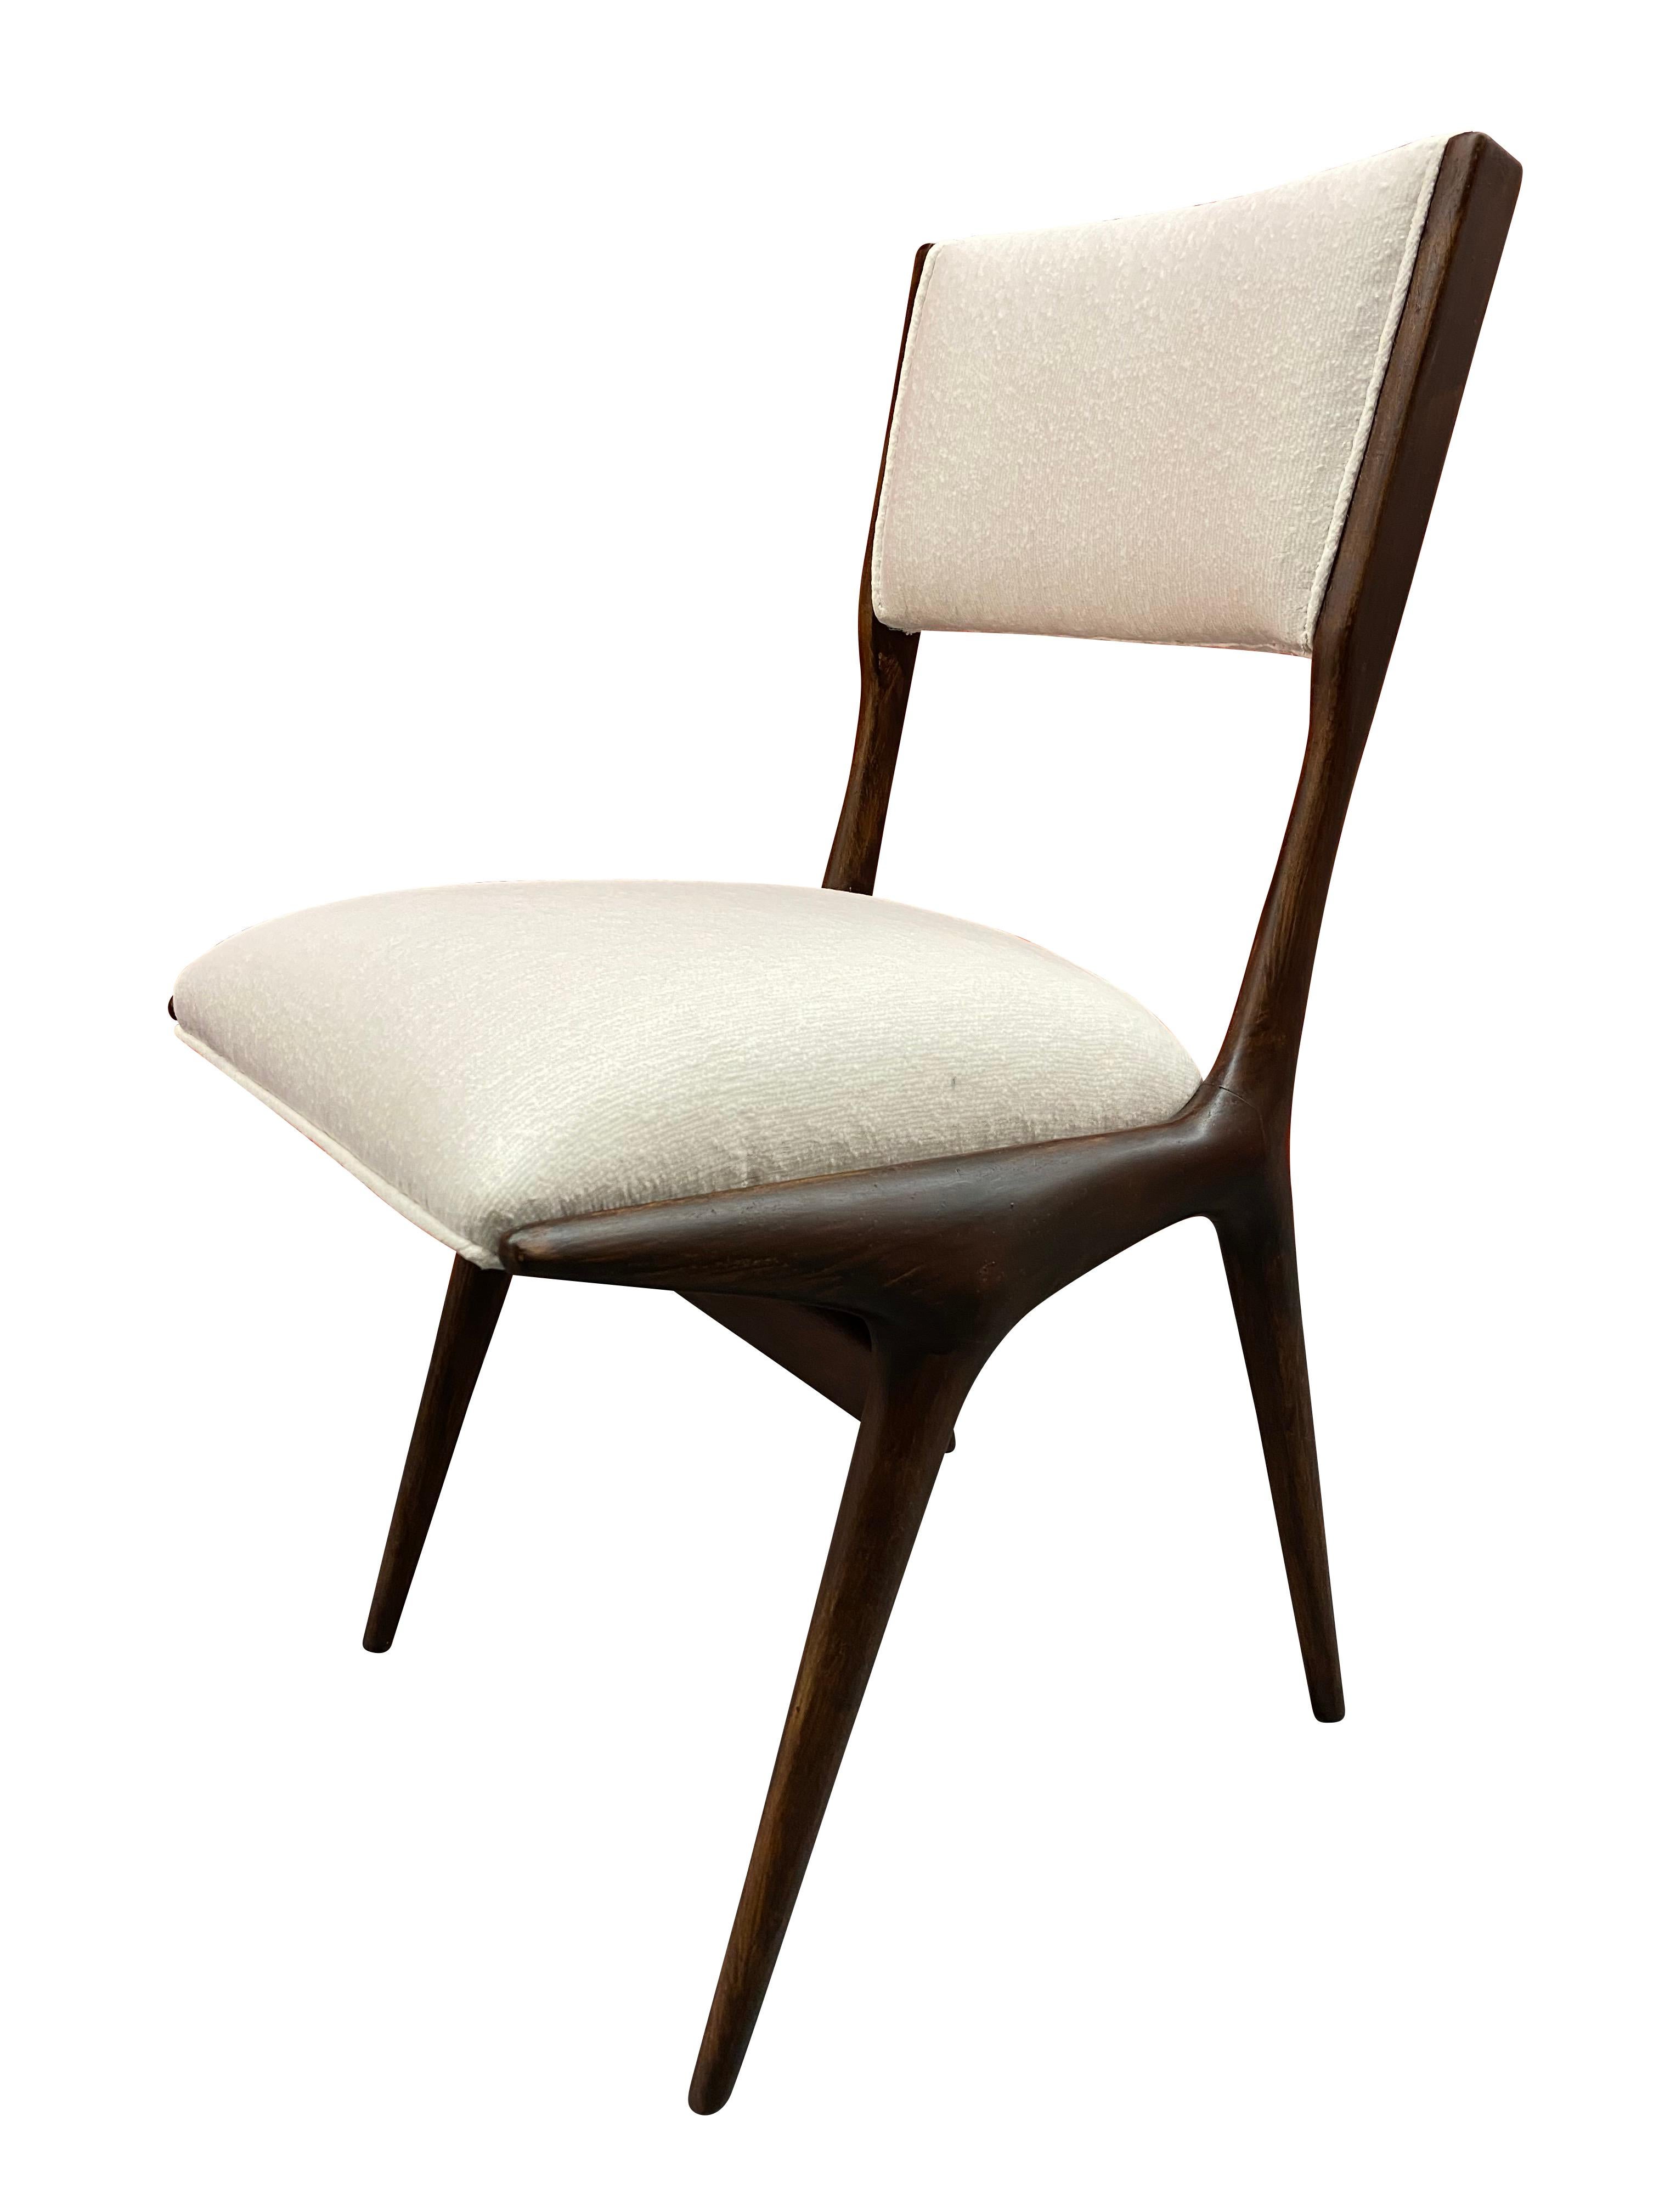 Pair of 634 chairs designed by Carlo di Carli and realized by American manufacturer Singer & Sons in 1951 and then by Cassina in 1953 onward. 

Chair has a beautiful delicate pitch upward when viewed from the profile or diagonal. 

Dark stained